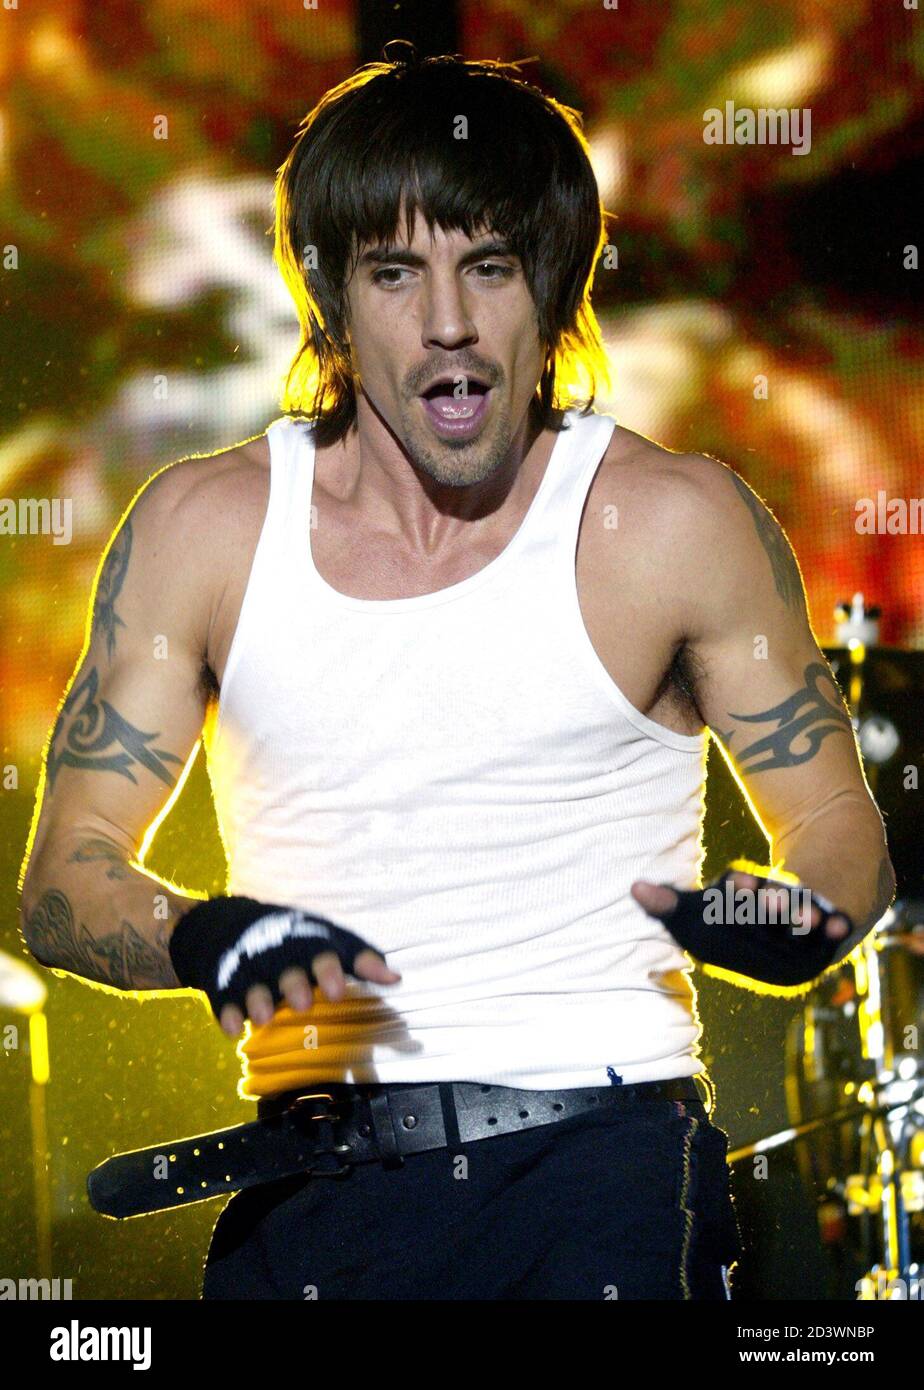 Red Hot Chili Peppers singer Anthony Kiedis performs during the first of two sold-out shows at The Joint inside Hard Rock Hotel & Casino in Las Vegas, Nevada, December 30, 2002. The rock band will embark on a European tour in January to promote the platinum-selling album 'By The Way.' The group also plans to reissue remastered versions of their first four albums on Jan. 28 with previously unreleased bonus tracks. Stock Photo